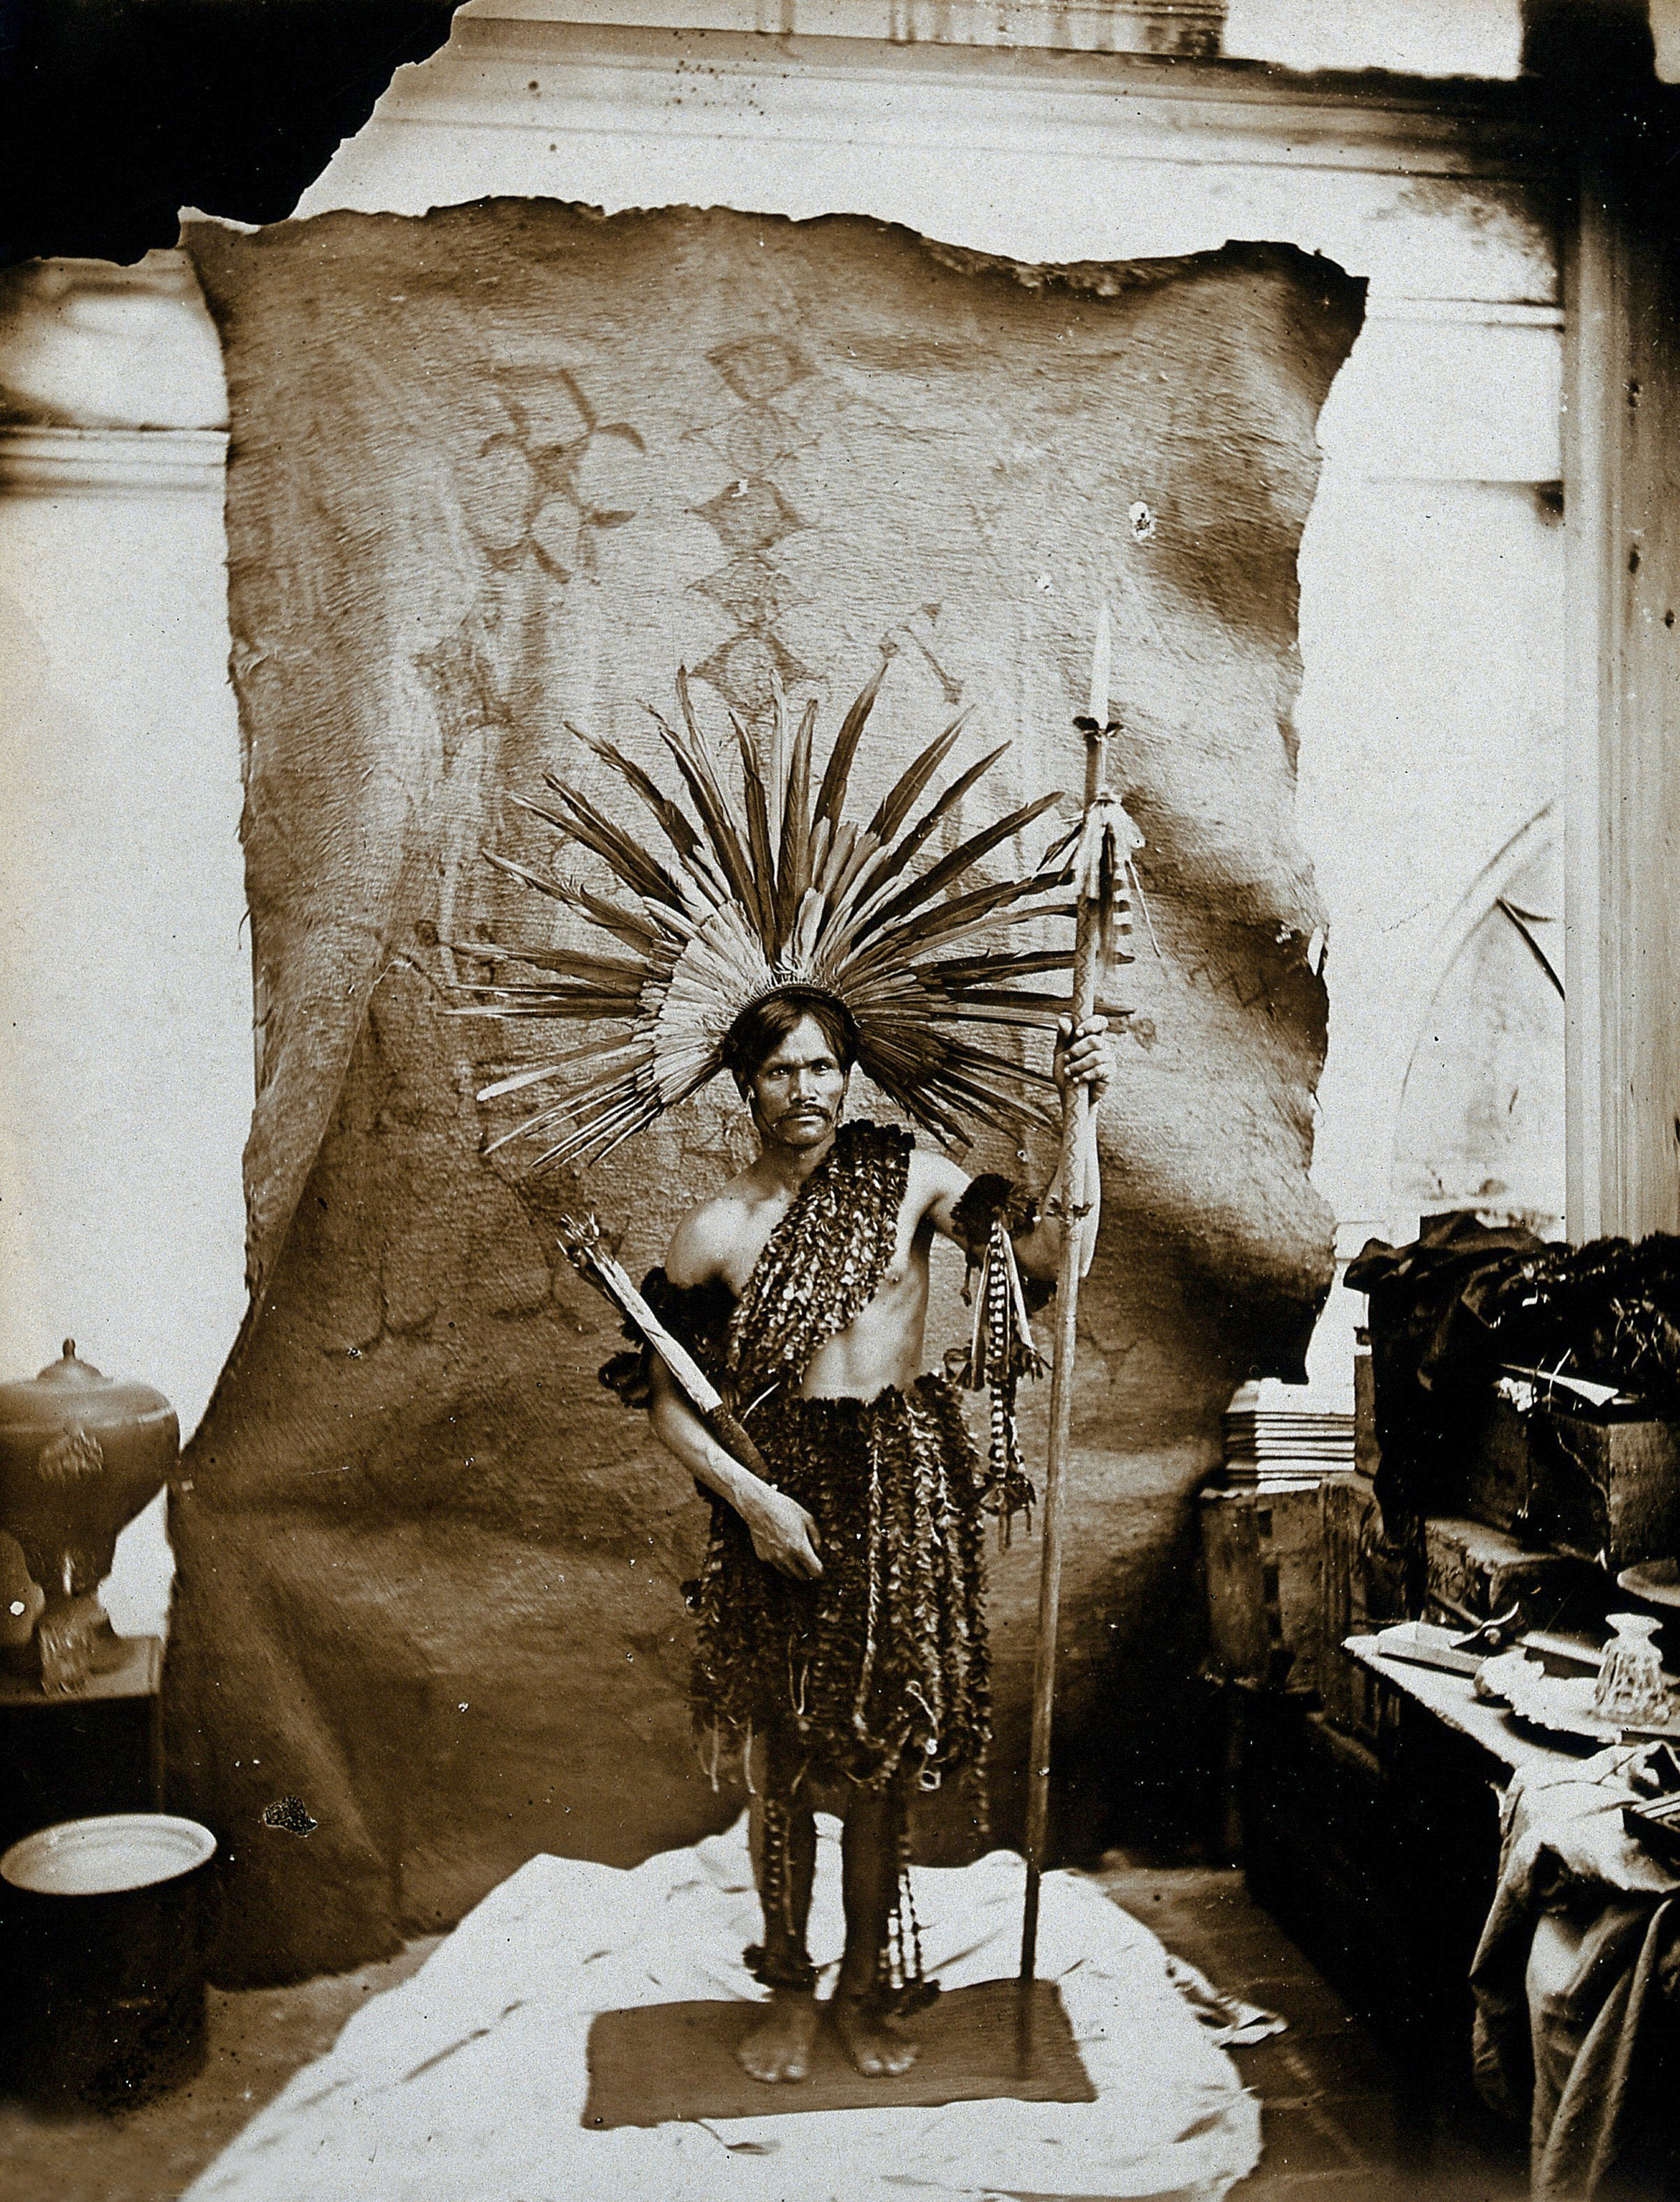 A man of an Amazonian tribe, holding a spear and wearing a feathered head-dress, in a photographic studio. 